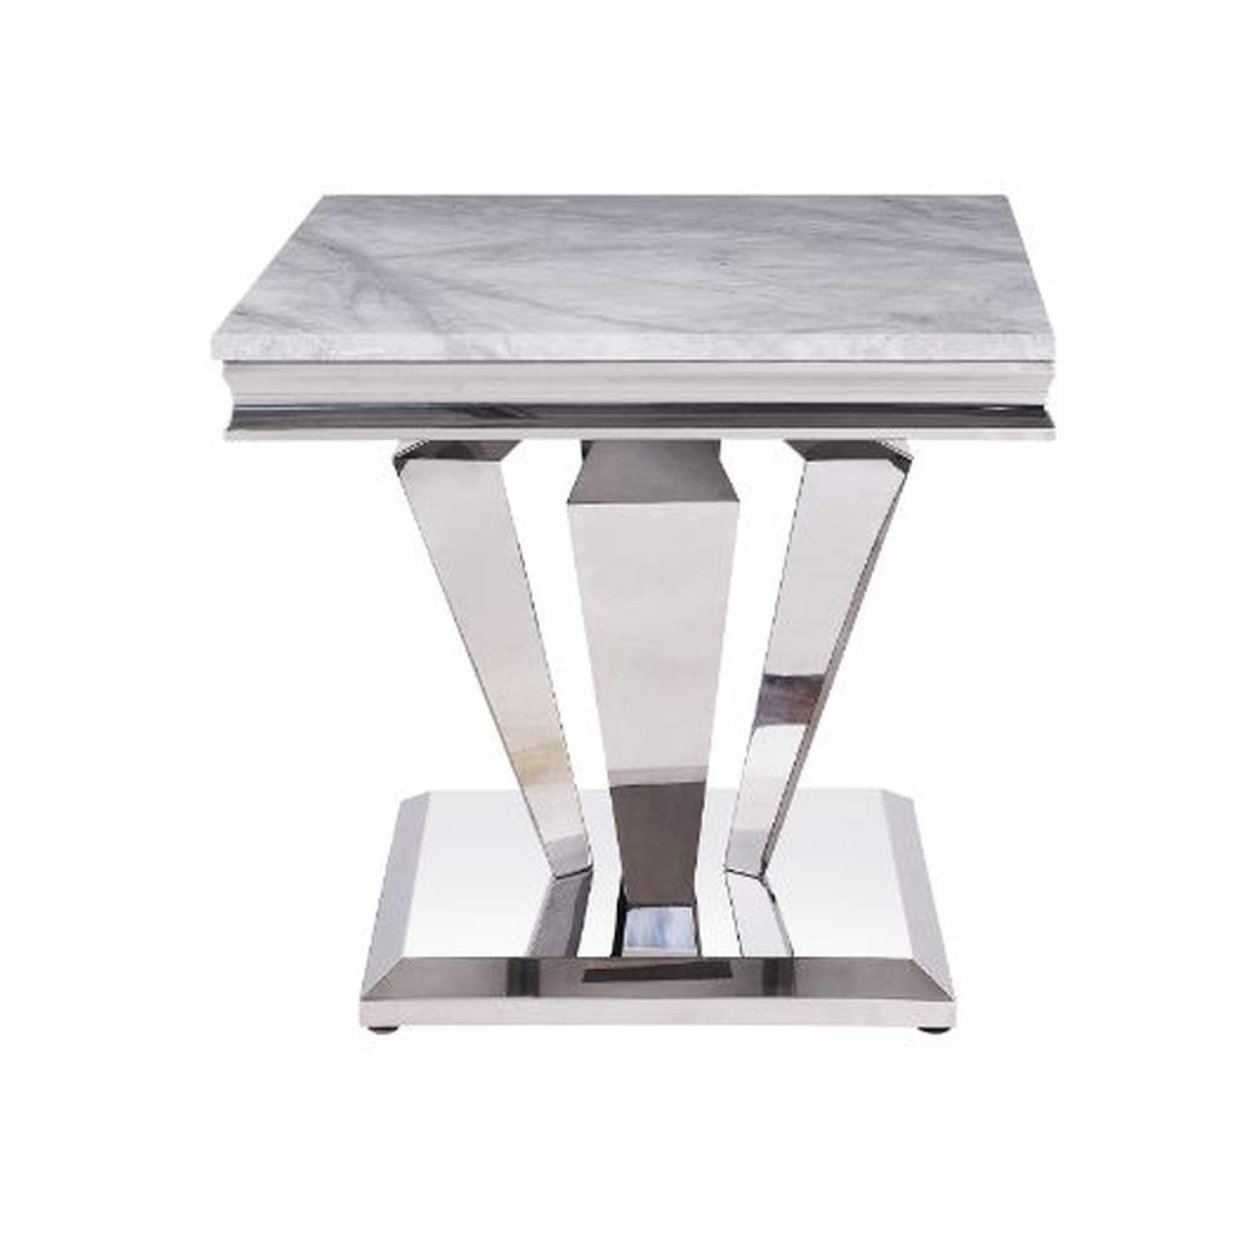 End Table With Faux Marble Top And Metal Base, White And Silver- Saltoro Sherpi